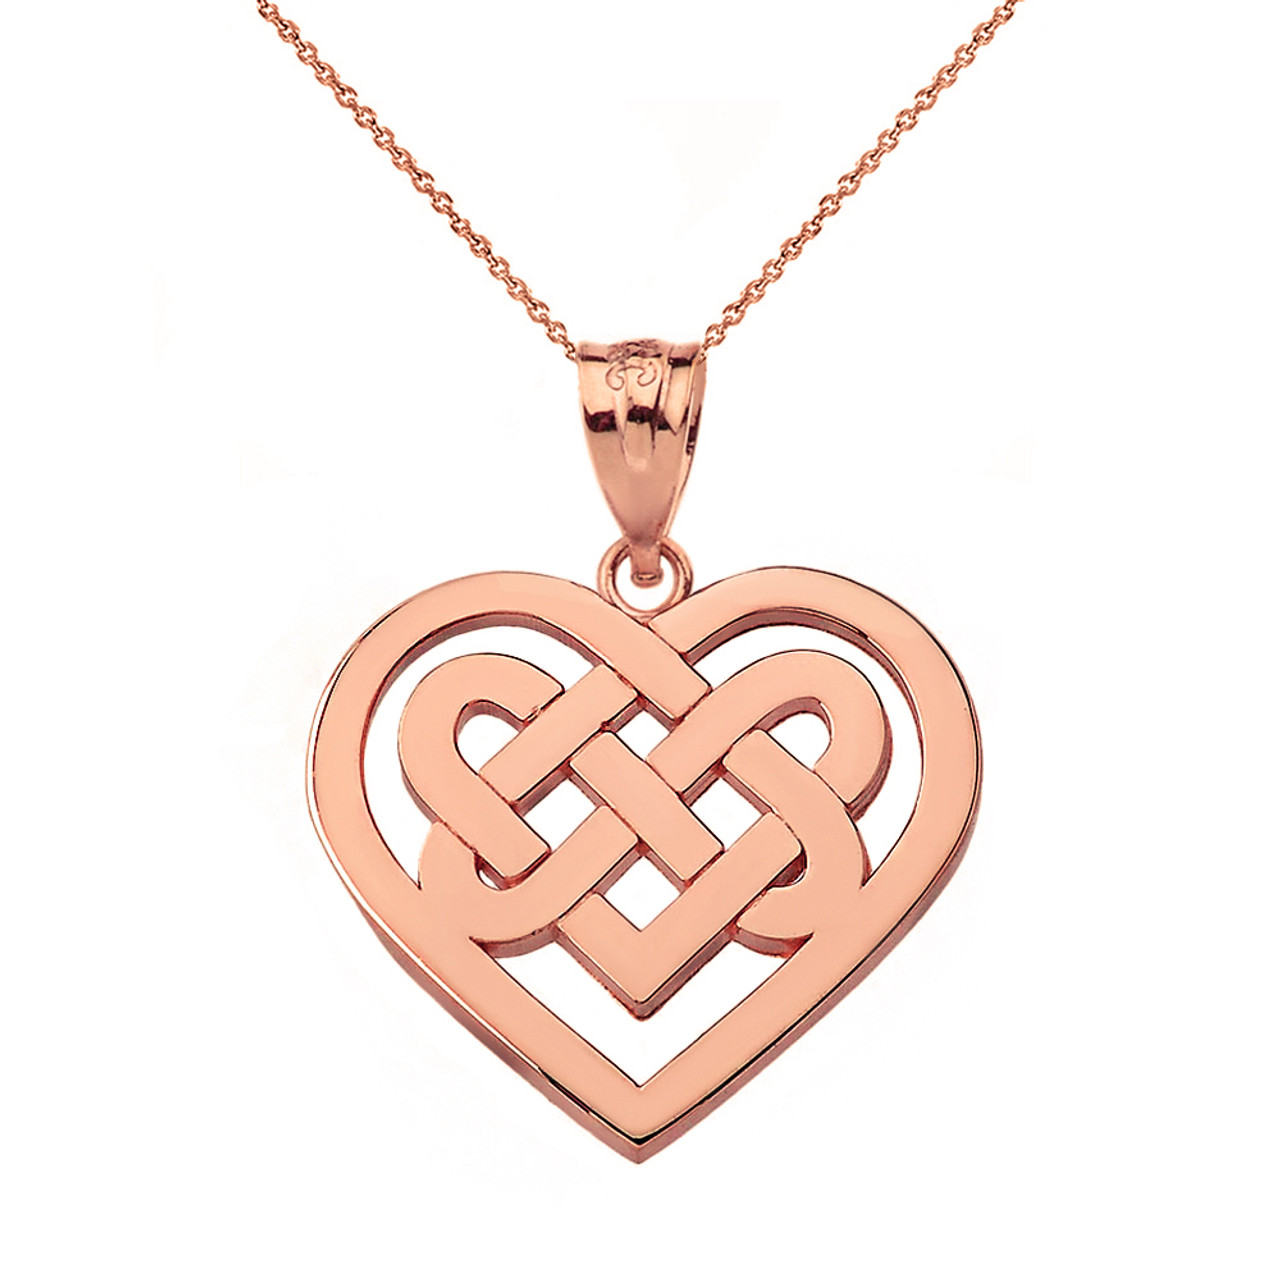 Solid Rose Gold Celtic Knot Woven Heart Pendant Necklace